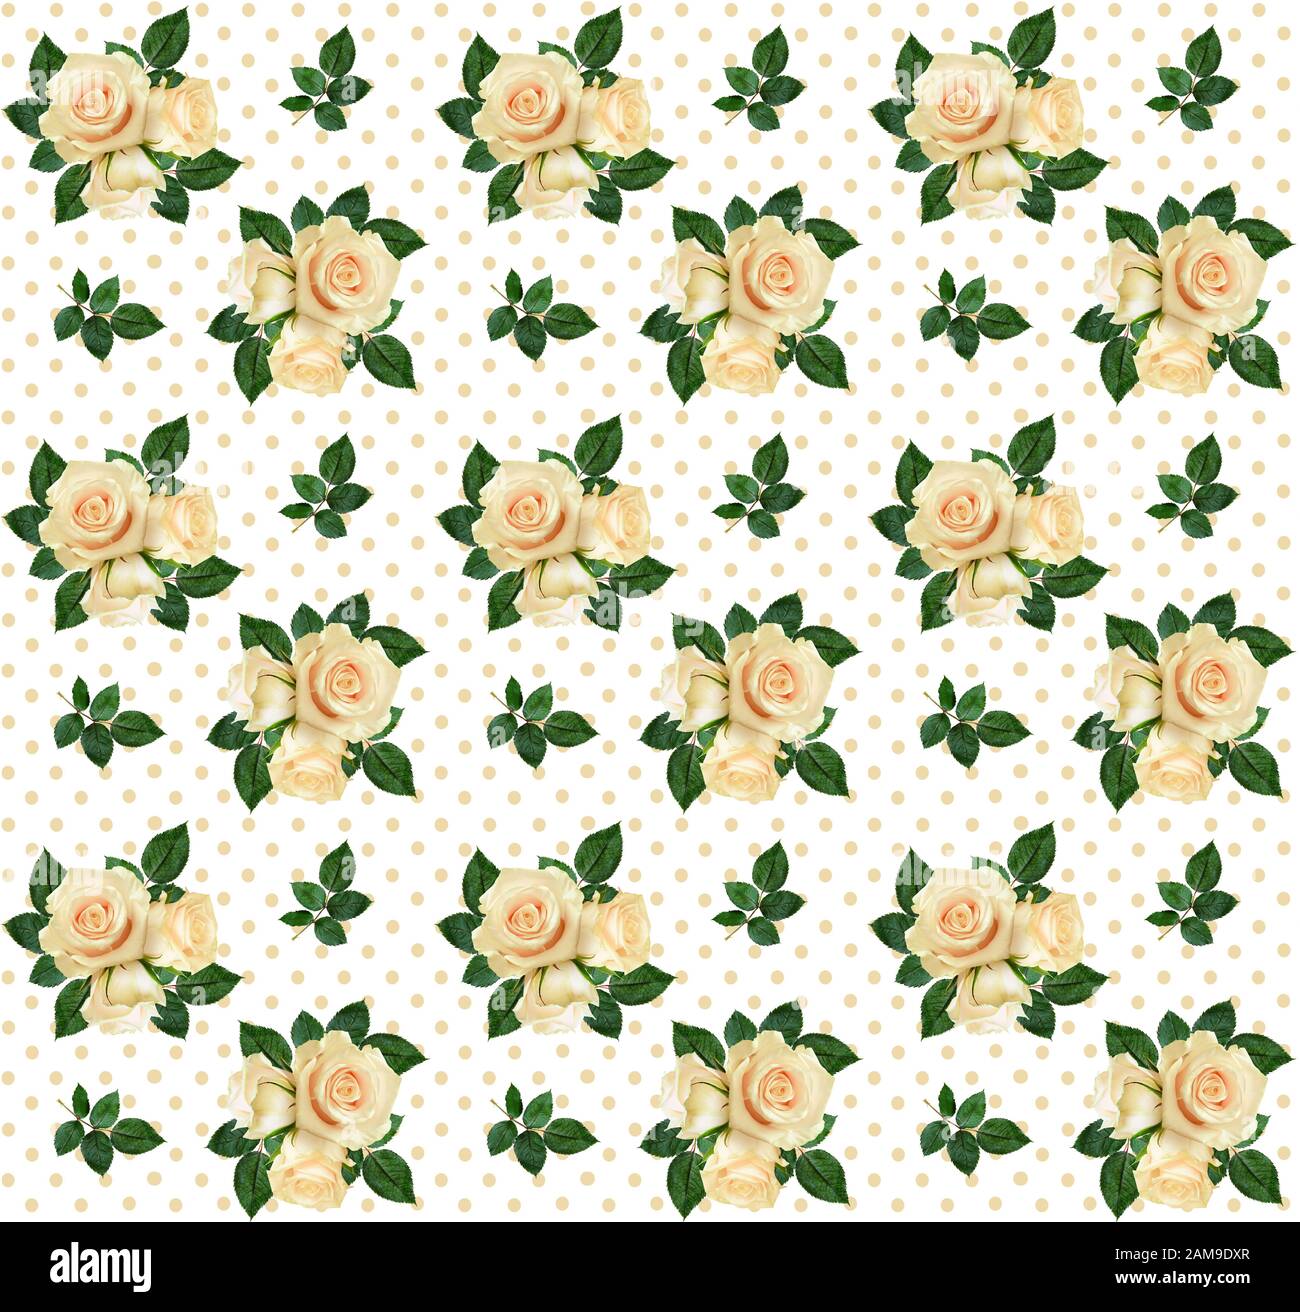 Seamless pattern with roses on polka dotted background Stock Photo